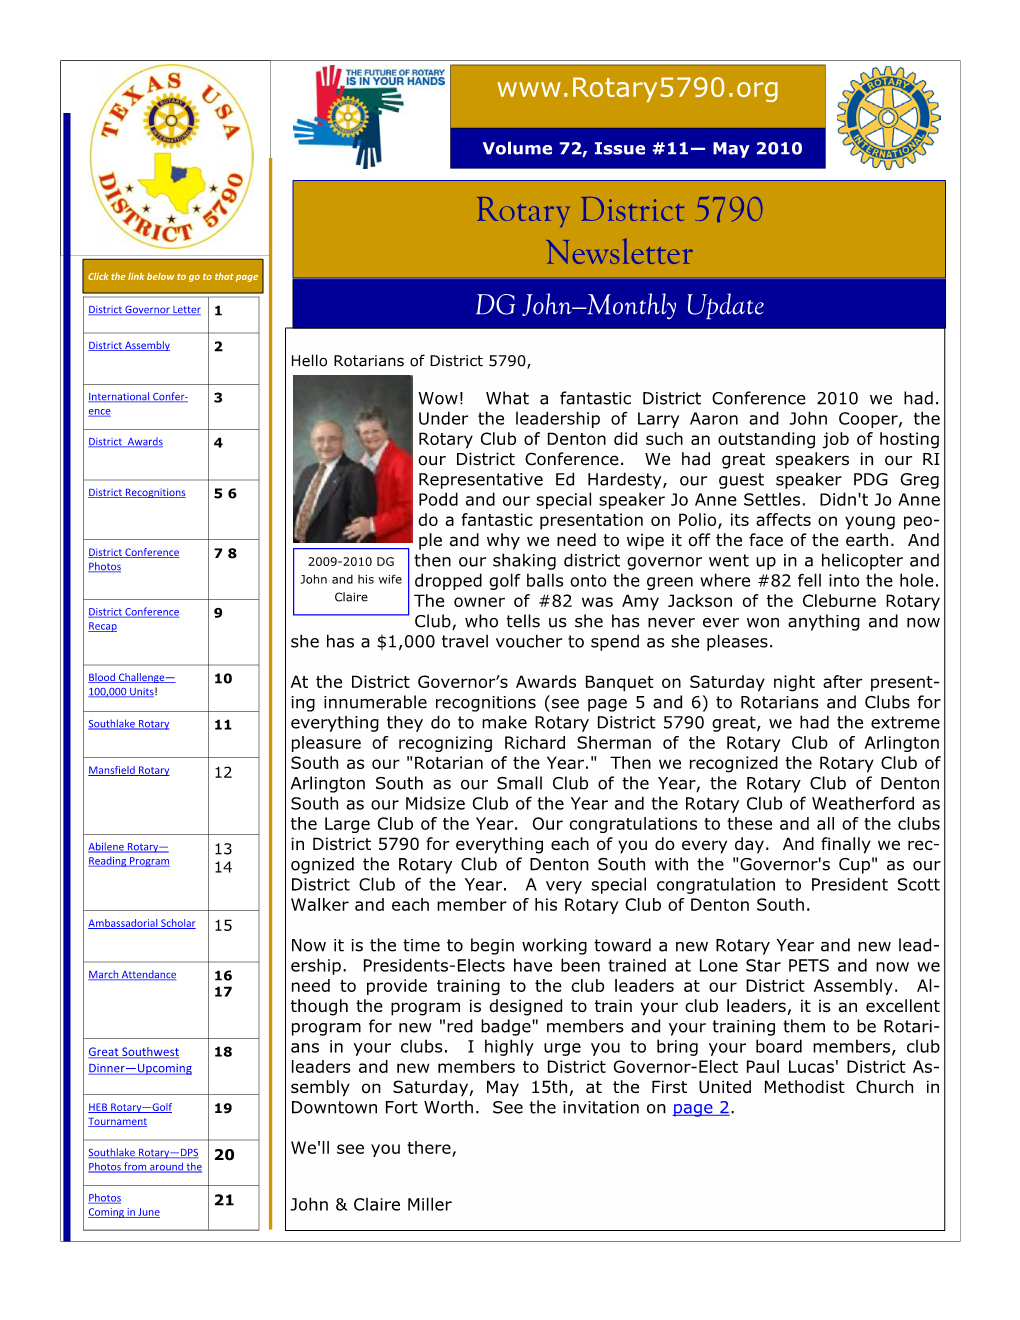 Rotary District 5790 Newsletter Click the Link Below to Go to That Page